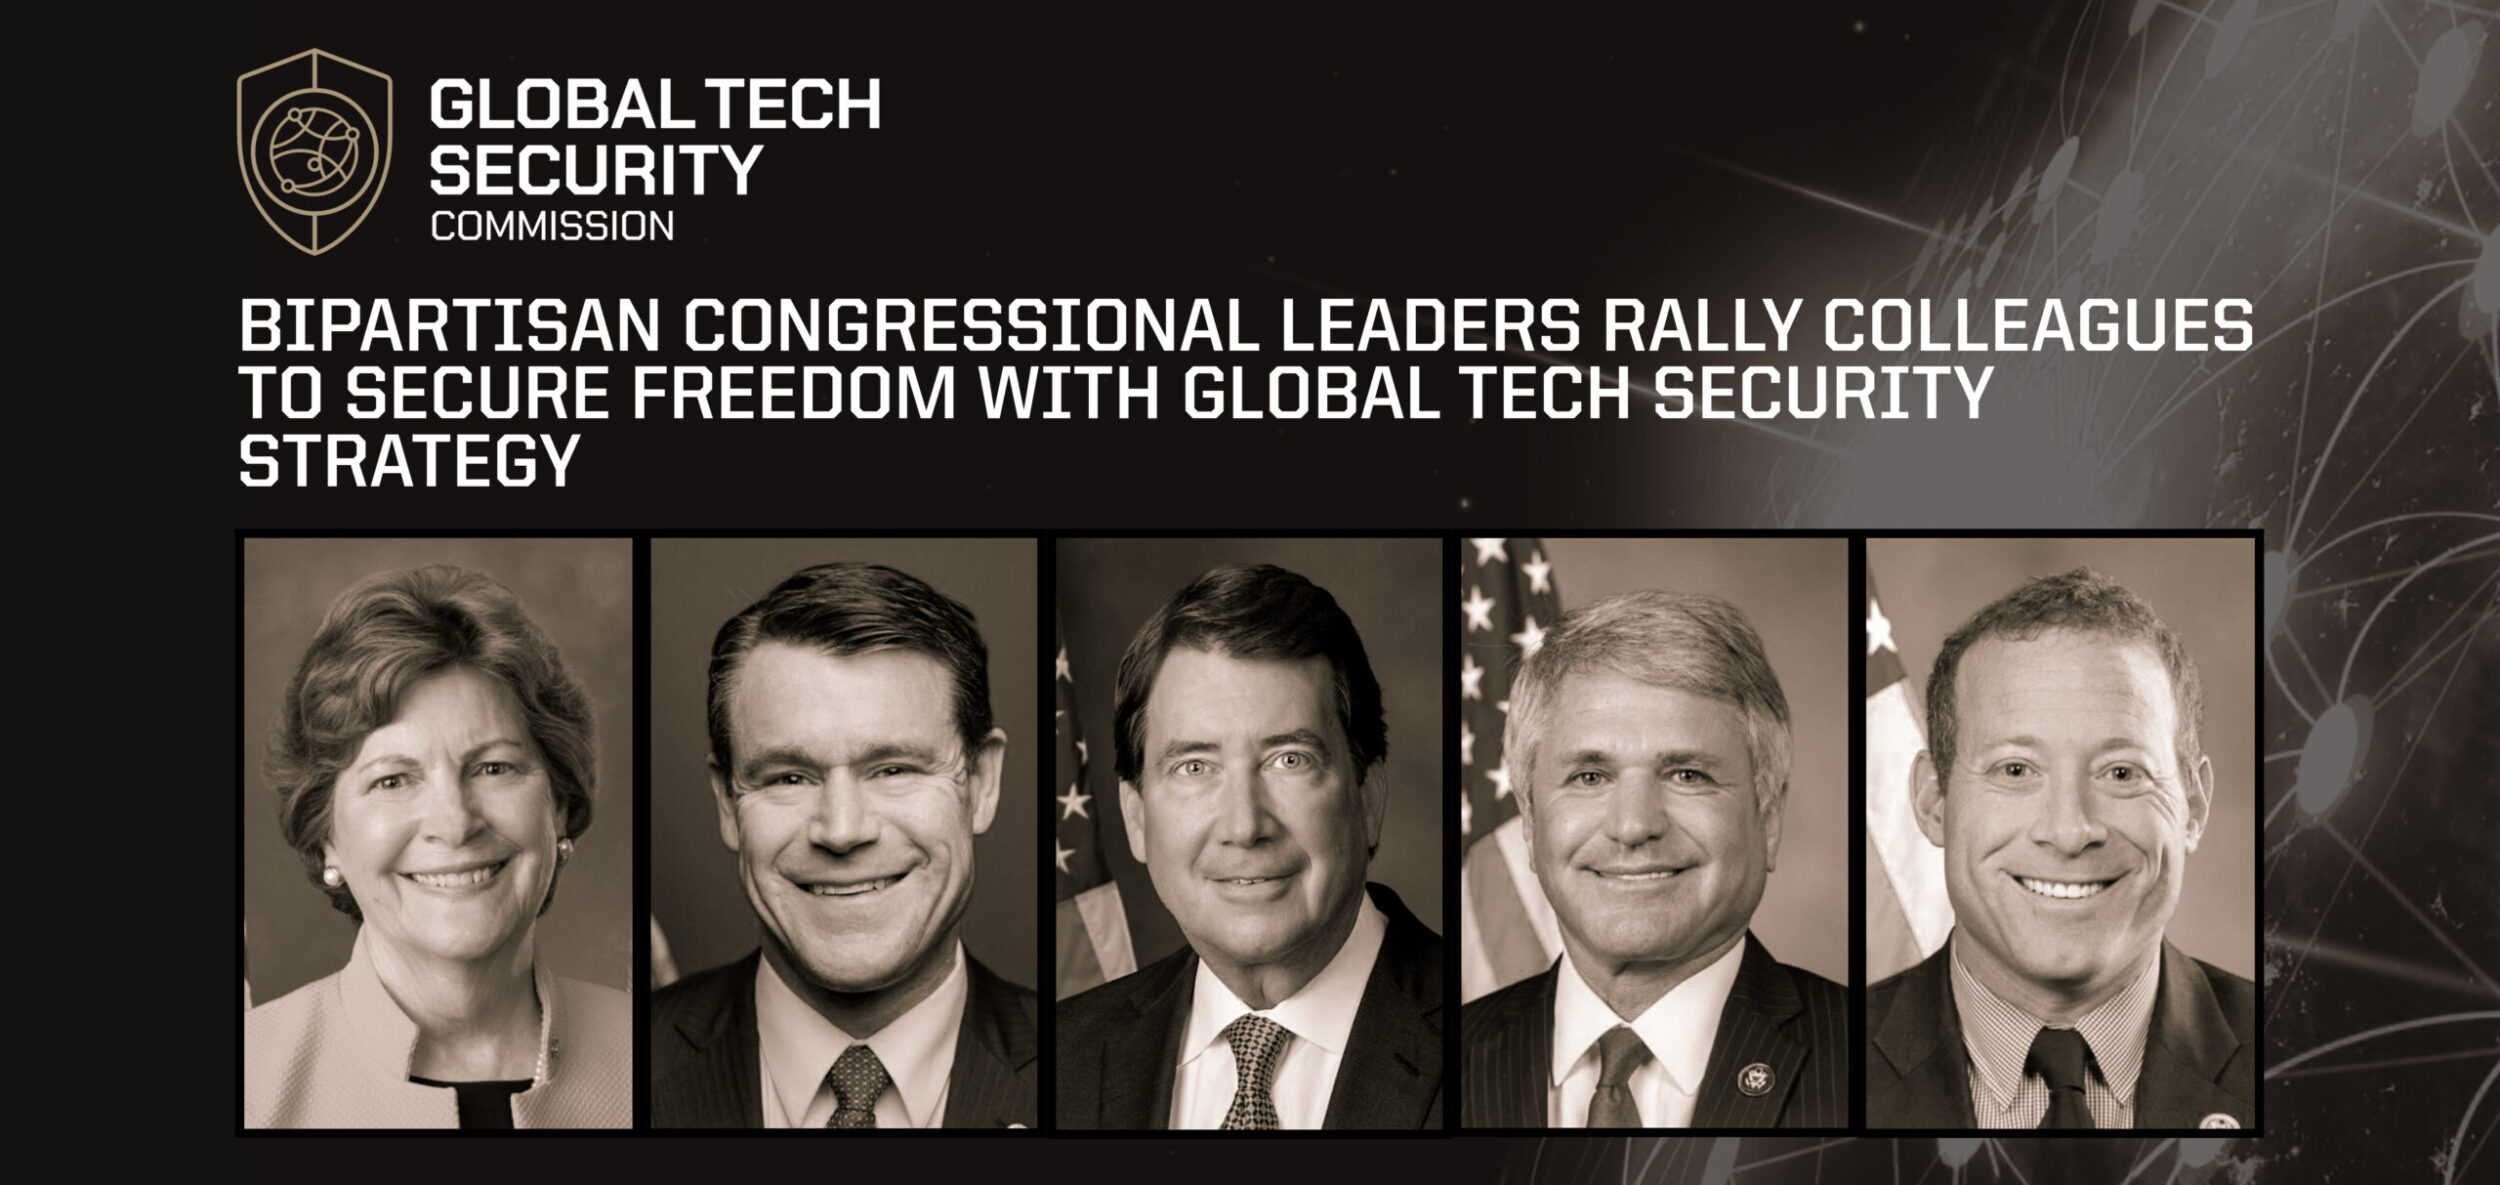 Bipartisan Congressional Leaders Rally Colleagues to Secure Freedom with Global Tech Security Strategy